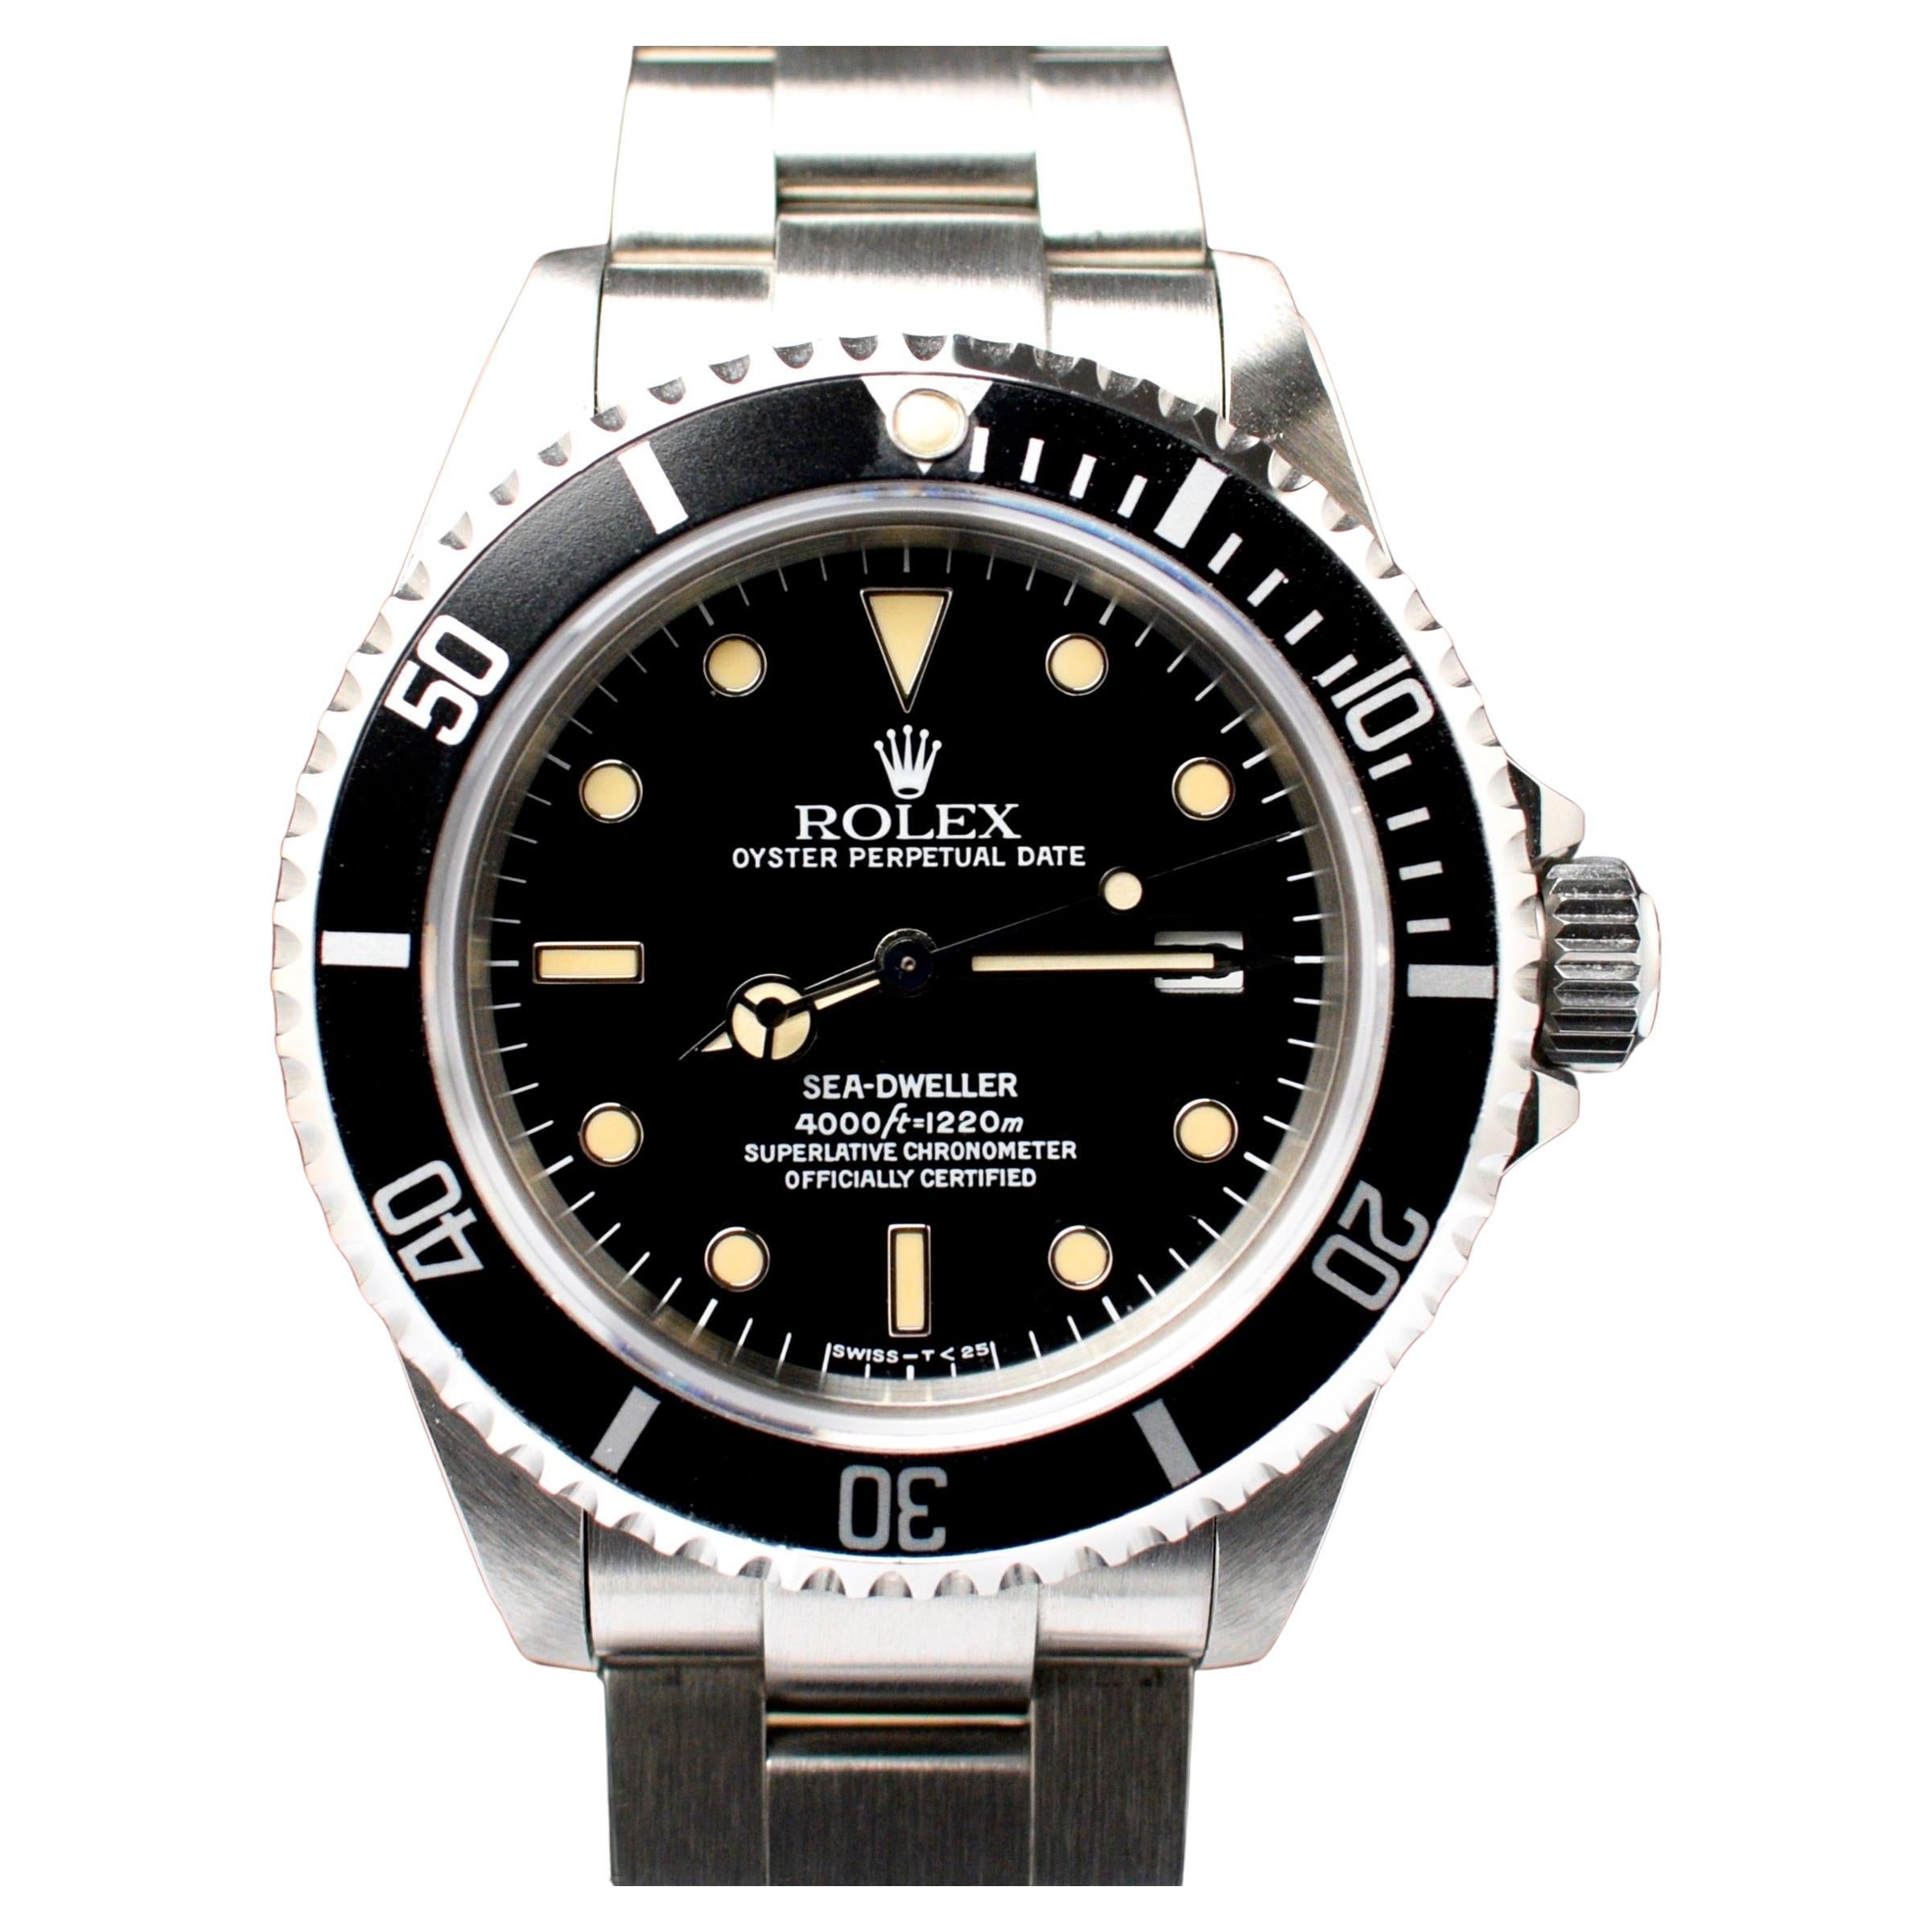 What is the Paul Newman Rolex?